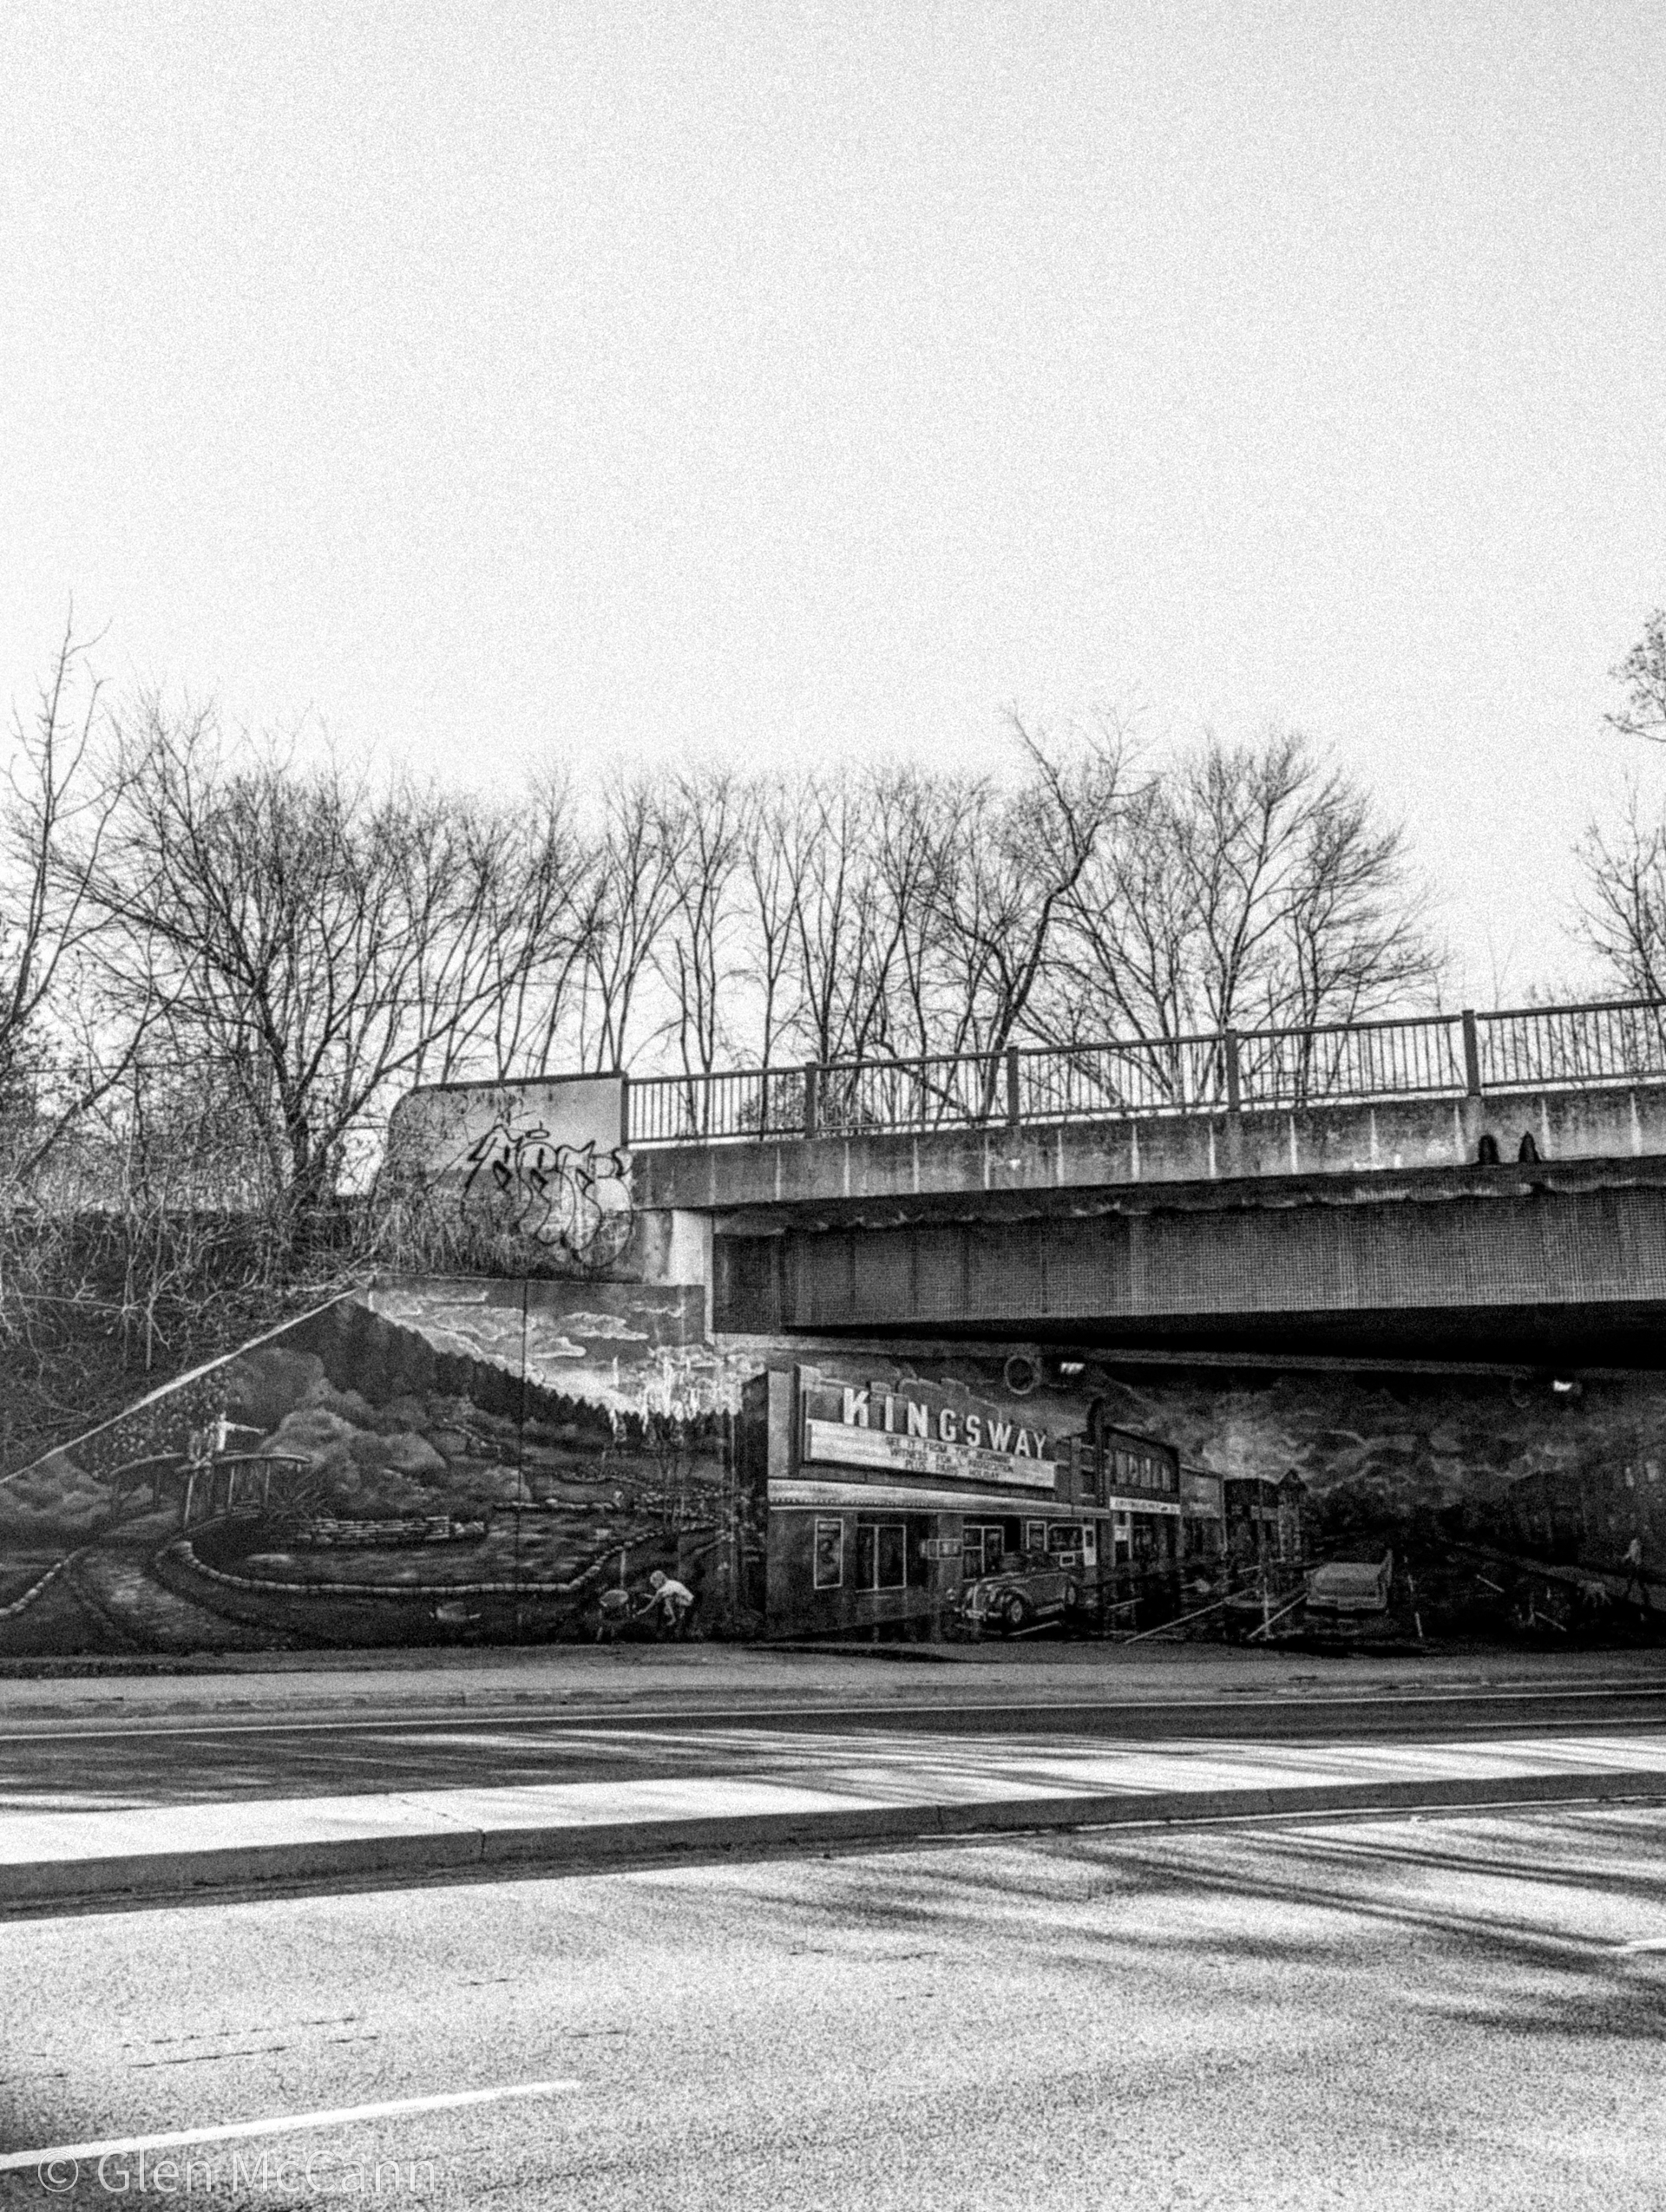 Black and white photo of a bridge in Toronto with a mural depicting Kingsway Cinemas underneath.